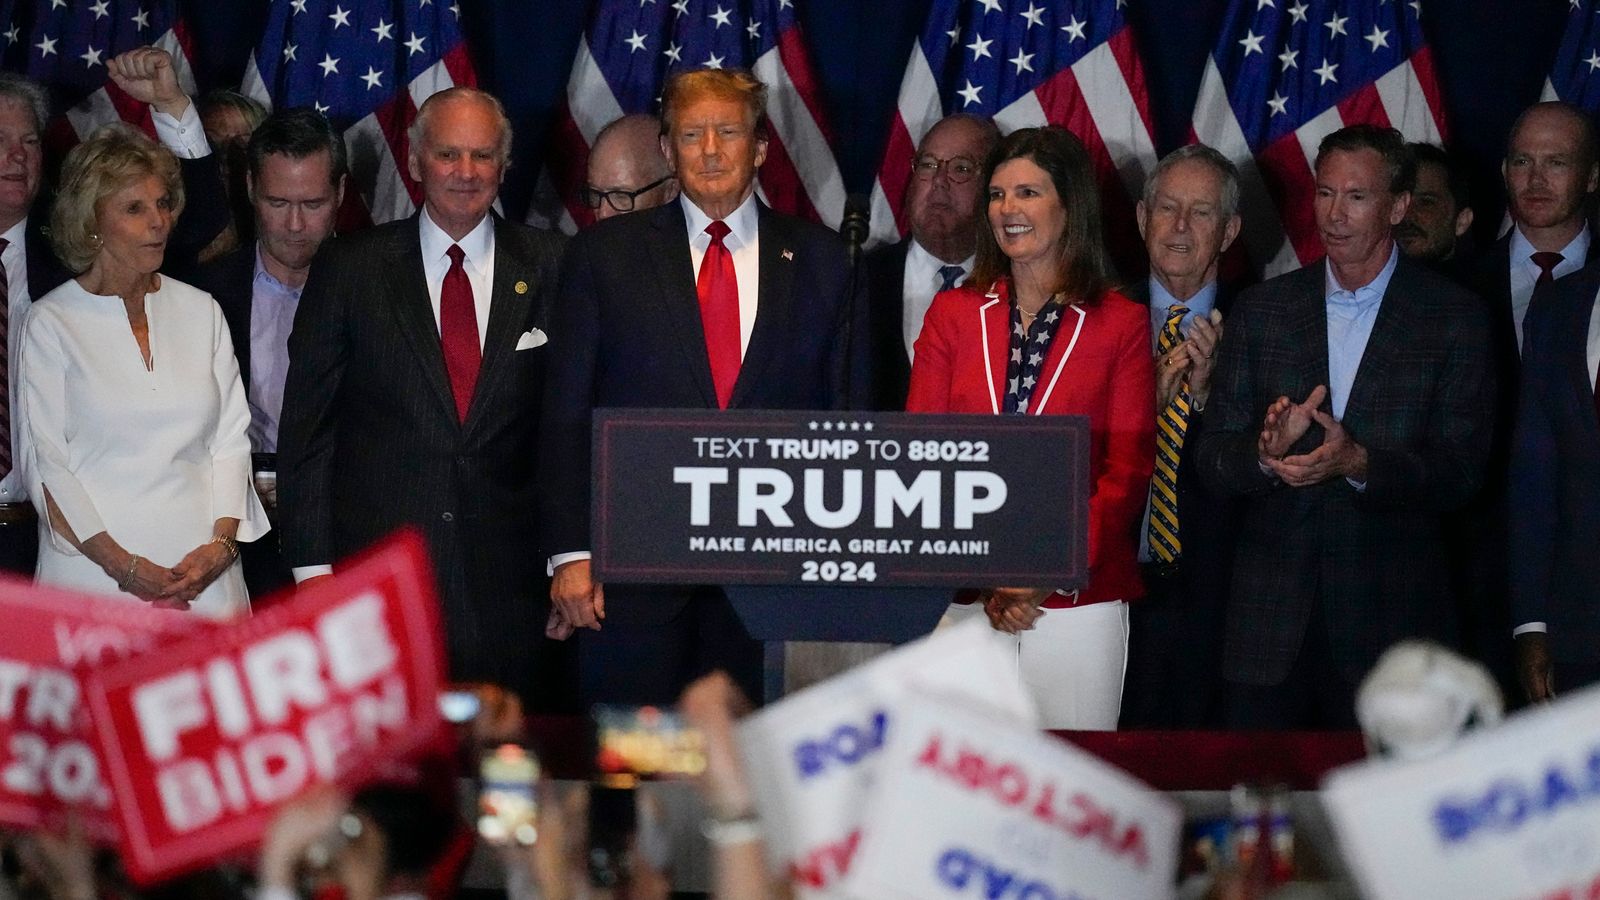 Donald Trump wins South Carolina primary as Nikki Haley insists she is 'not giving up fight'